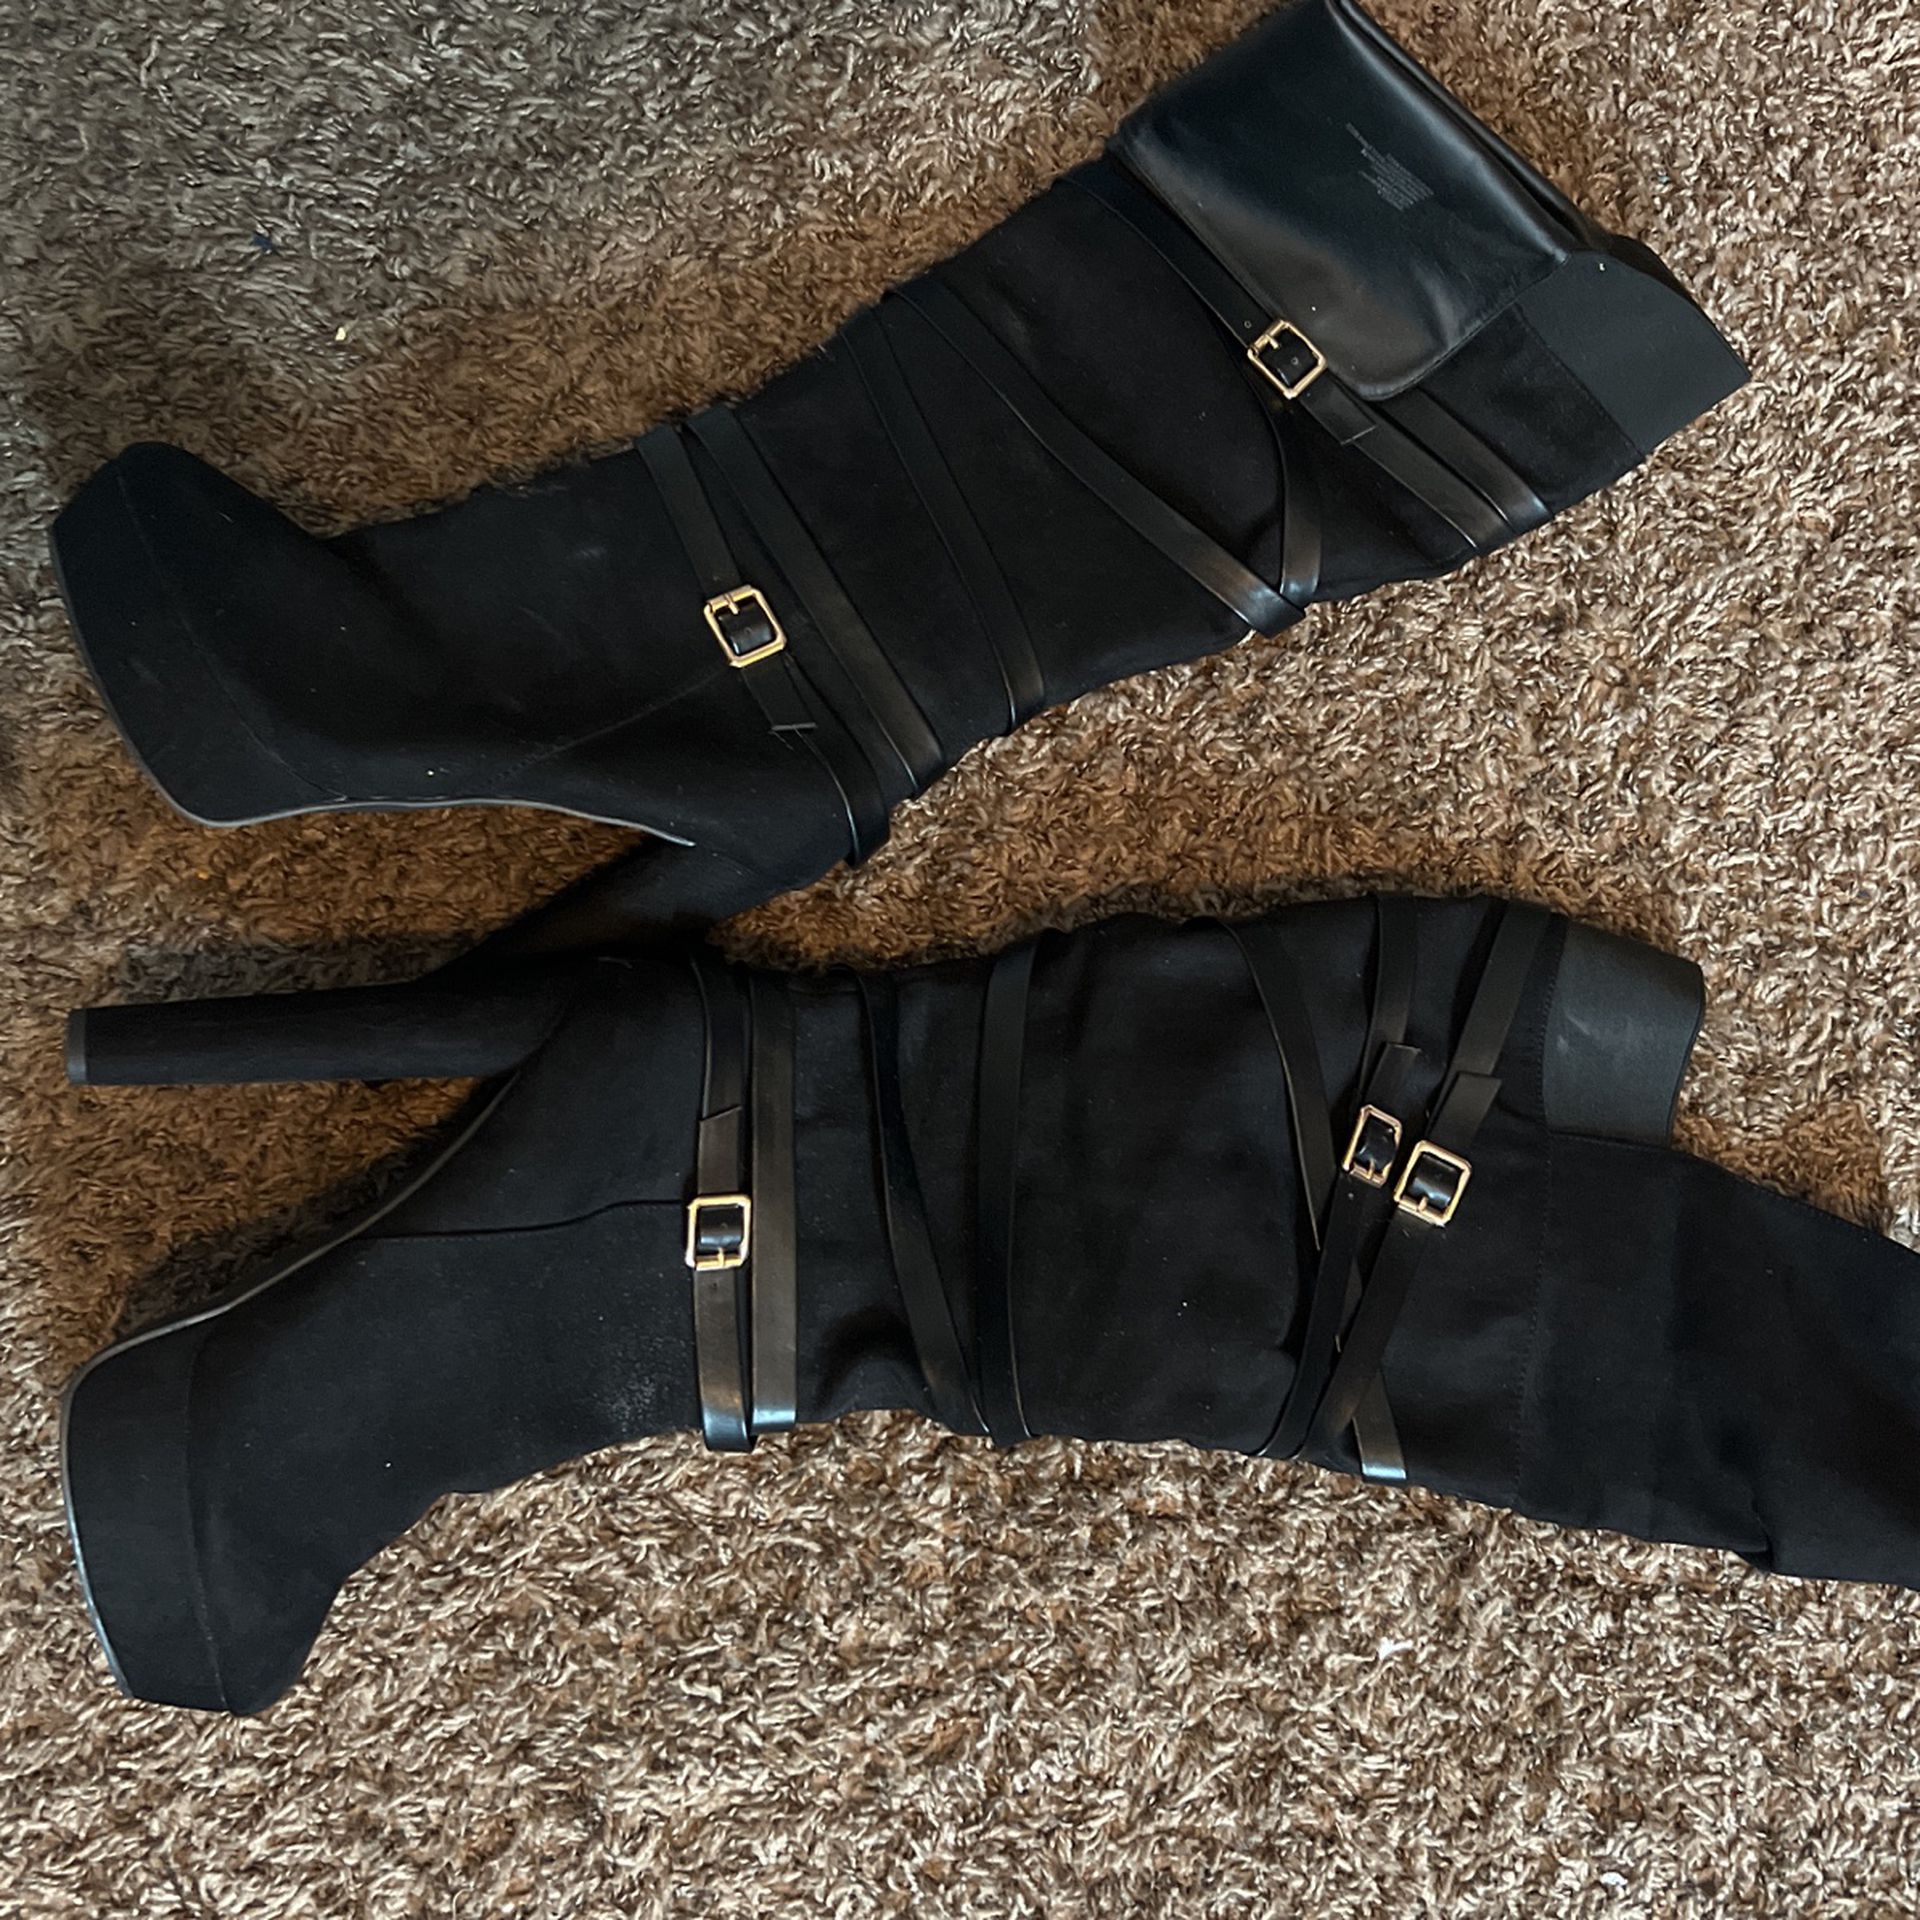 Thigh Boots For Sale! Size 11!